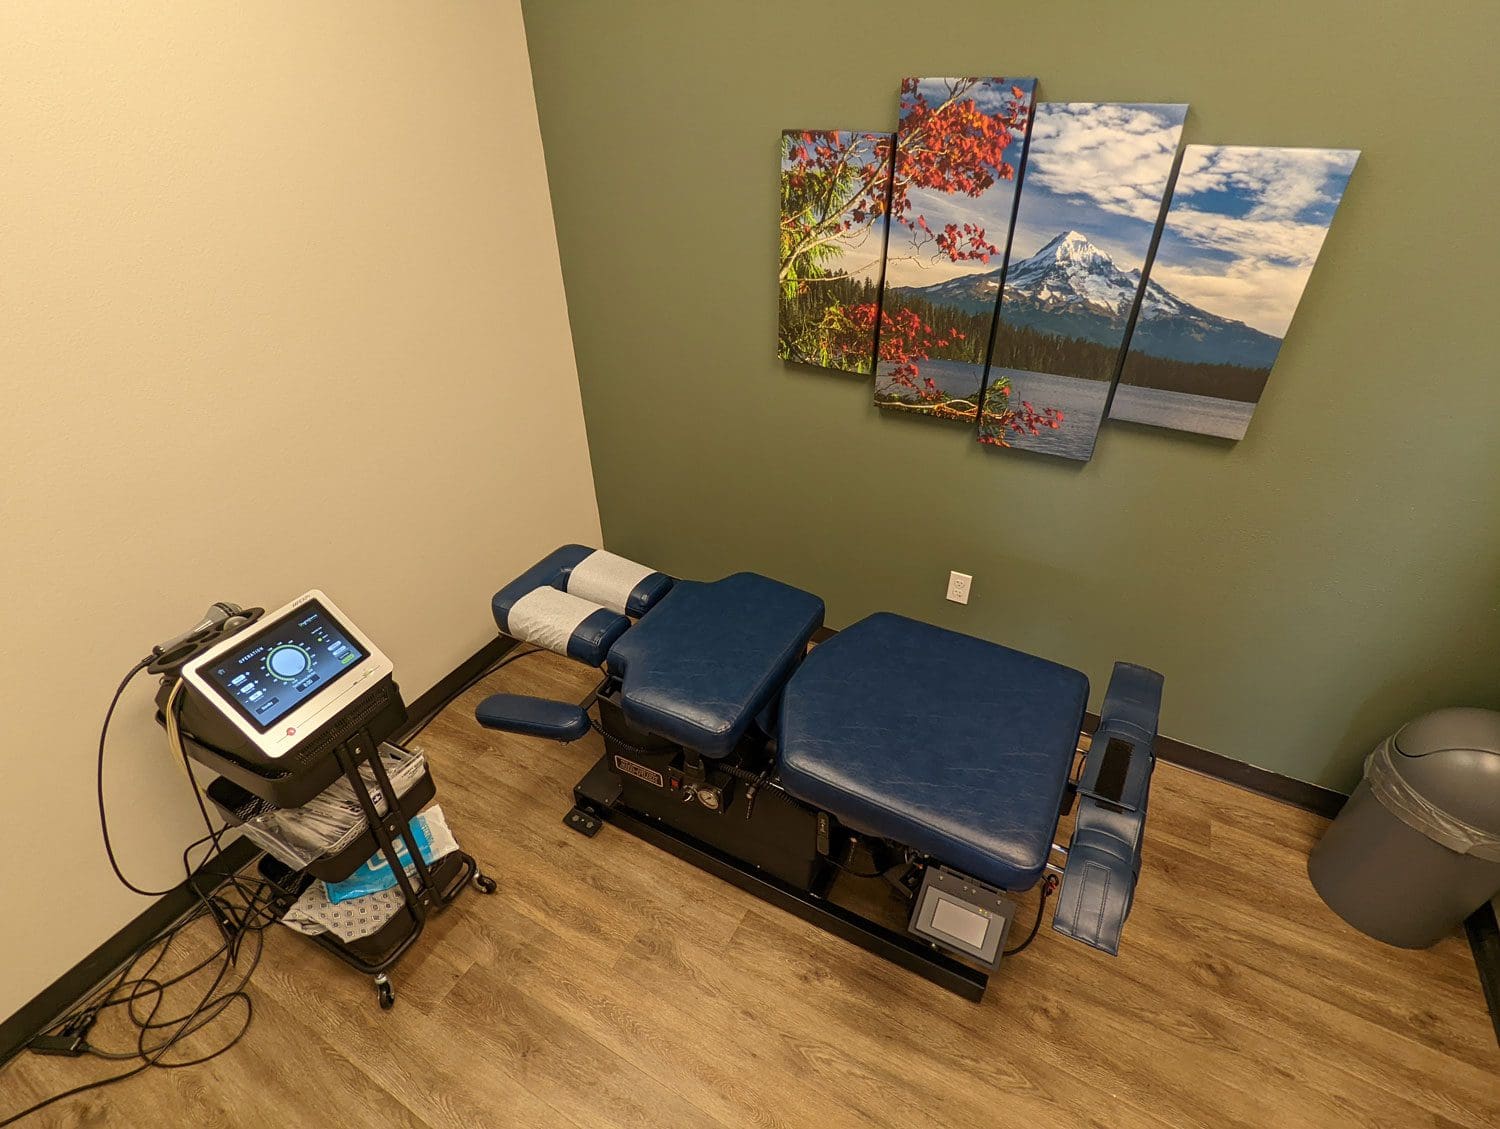 A chiropractic treatment room in South Salem with an adjustment table, lovely mountain wall art, wood floors, and serene green walls.